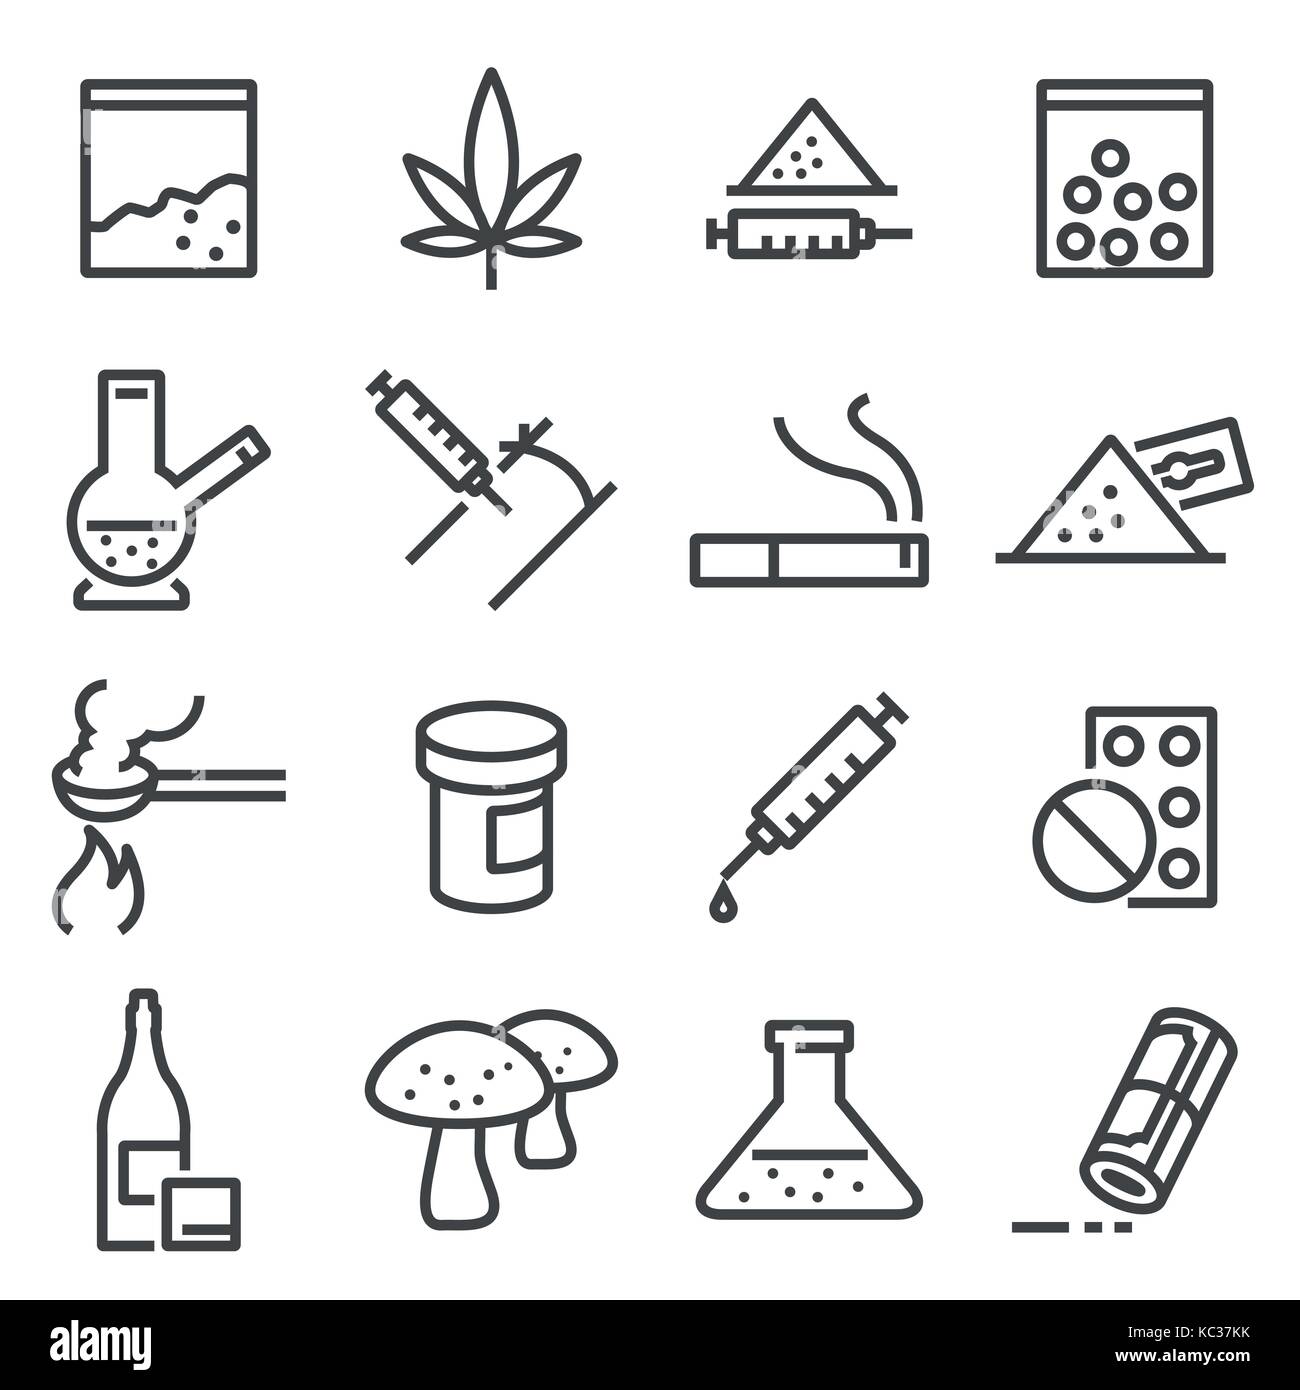 Drugs line icons. Contains such icons as marijuana, cocaine, heroin, LSD extasy Stock Vector